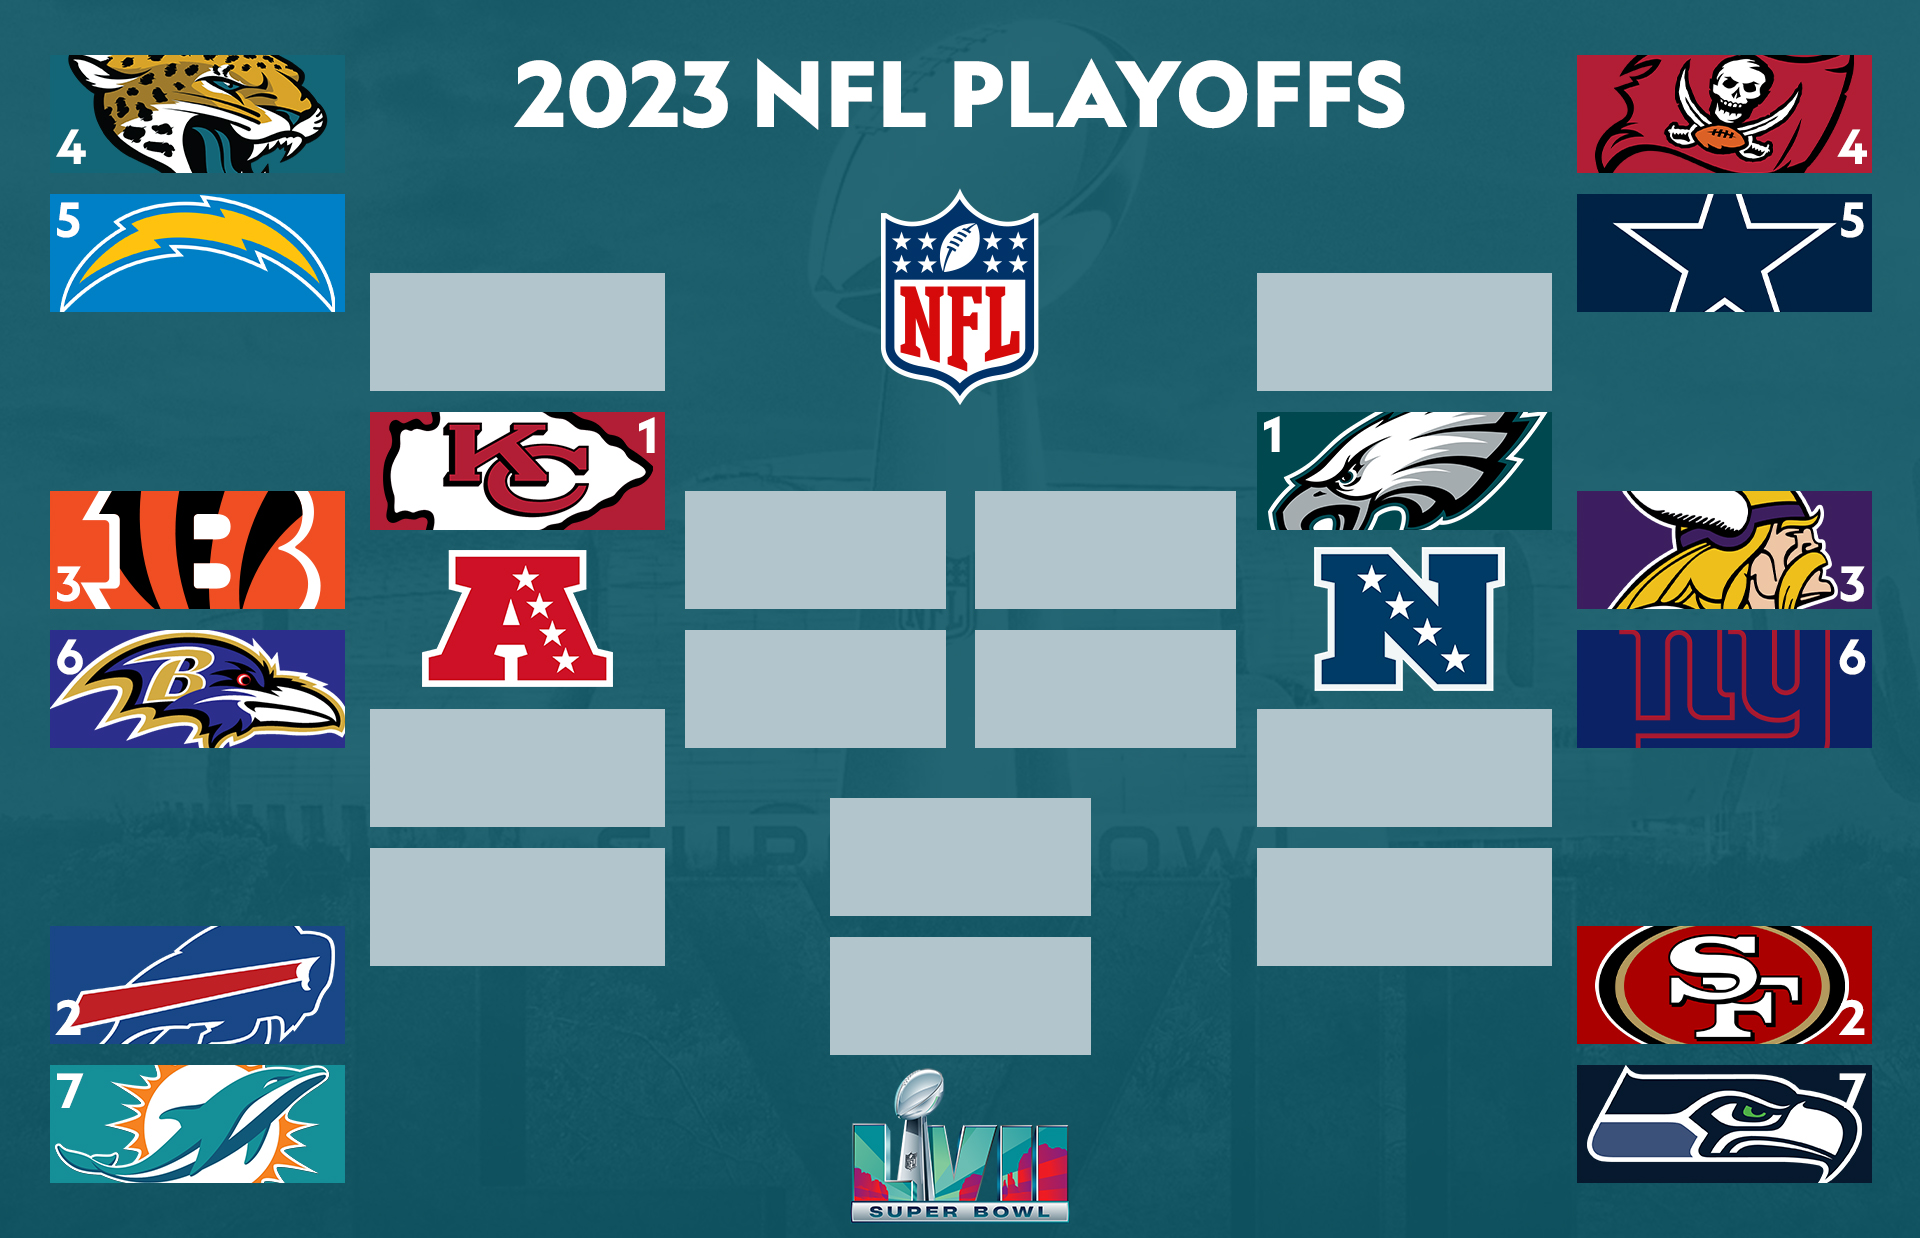 NFL Wild Card Weekend AFI's analysis and predictions